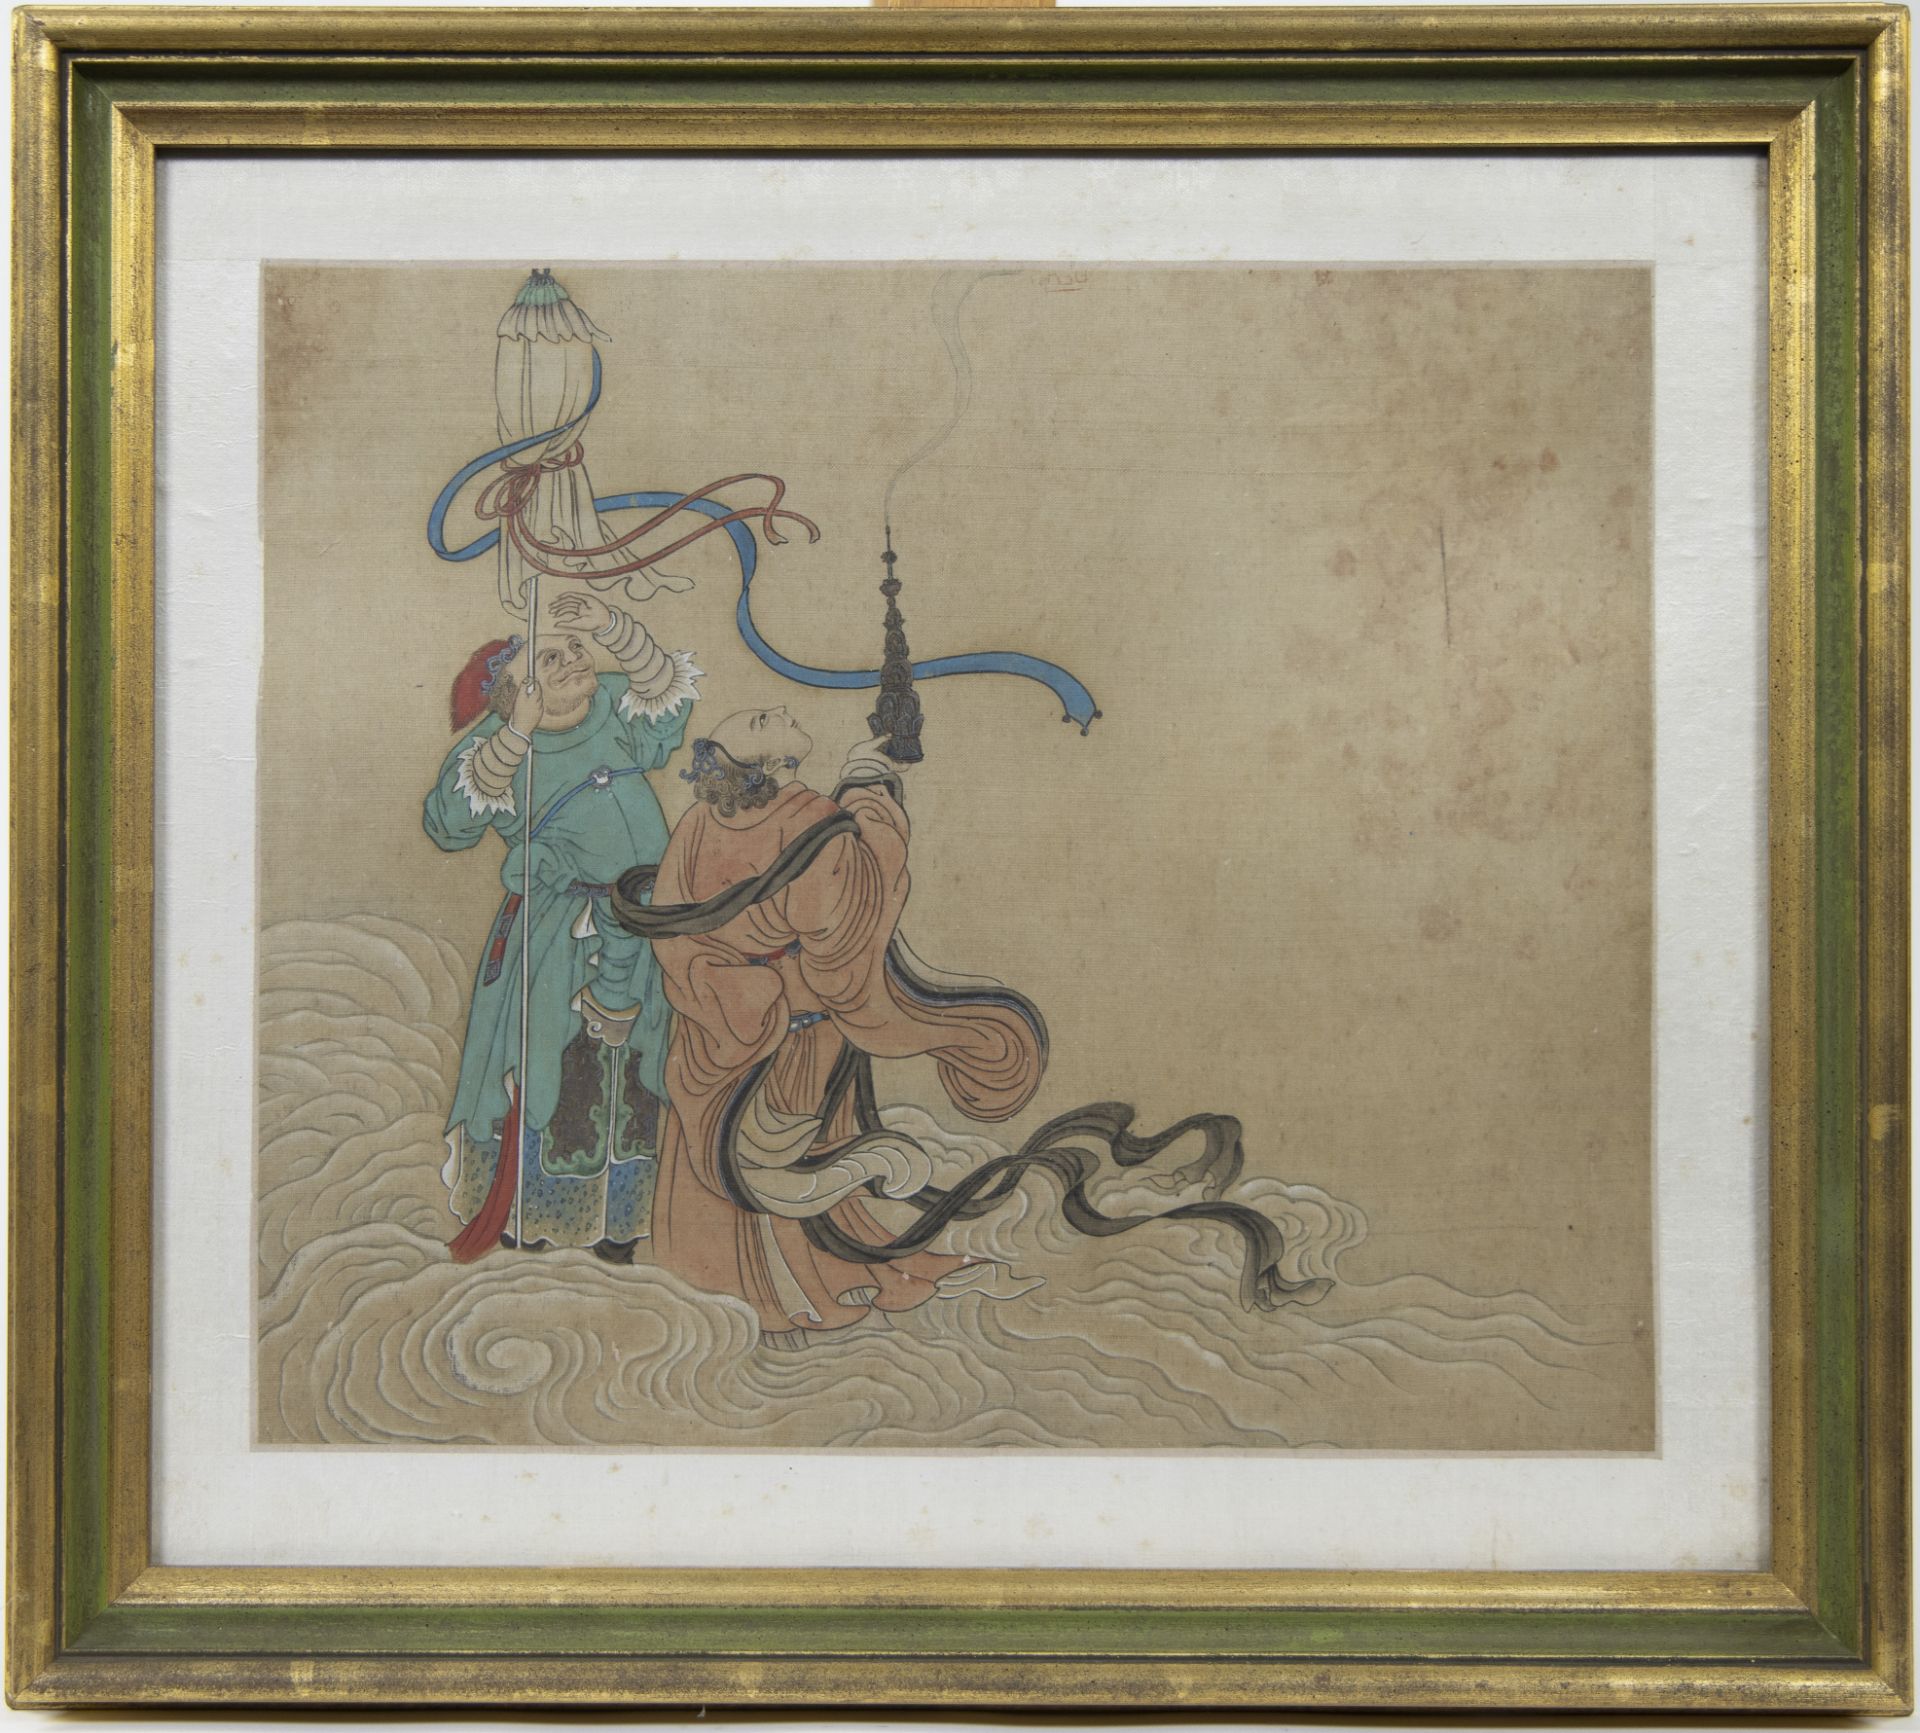 Set of 13 Chinese coloured drawings on silk, 19th century, some are signed - Image 14 of 17